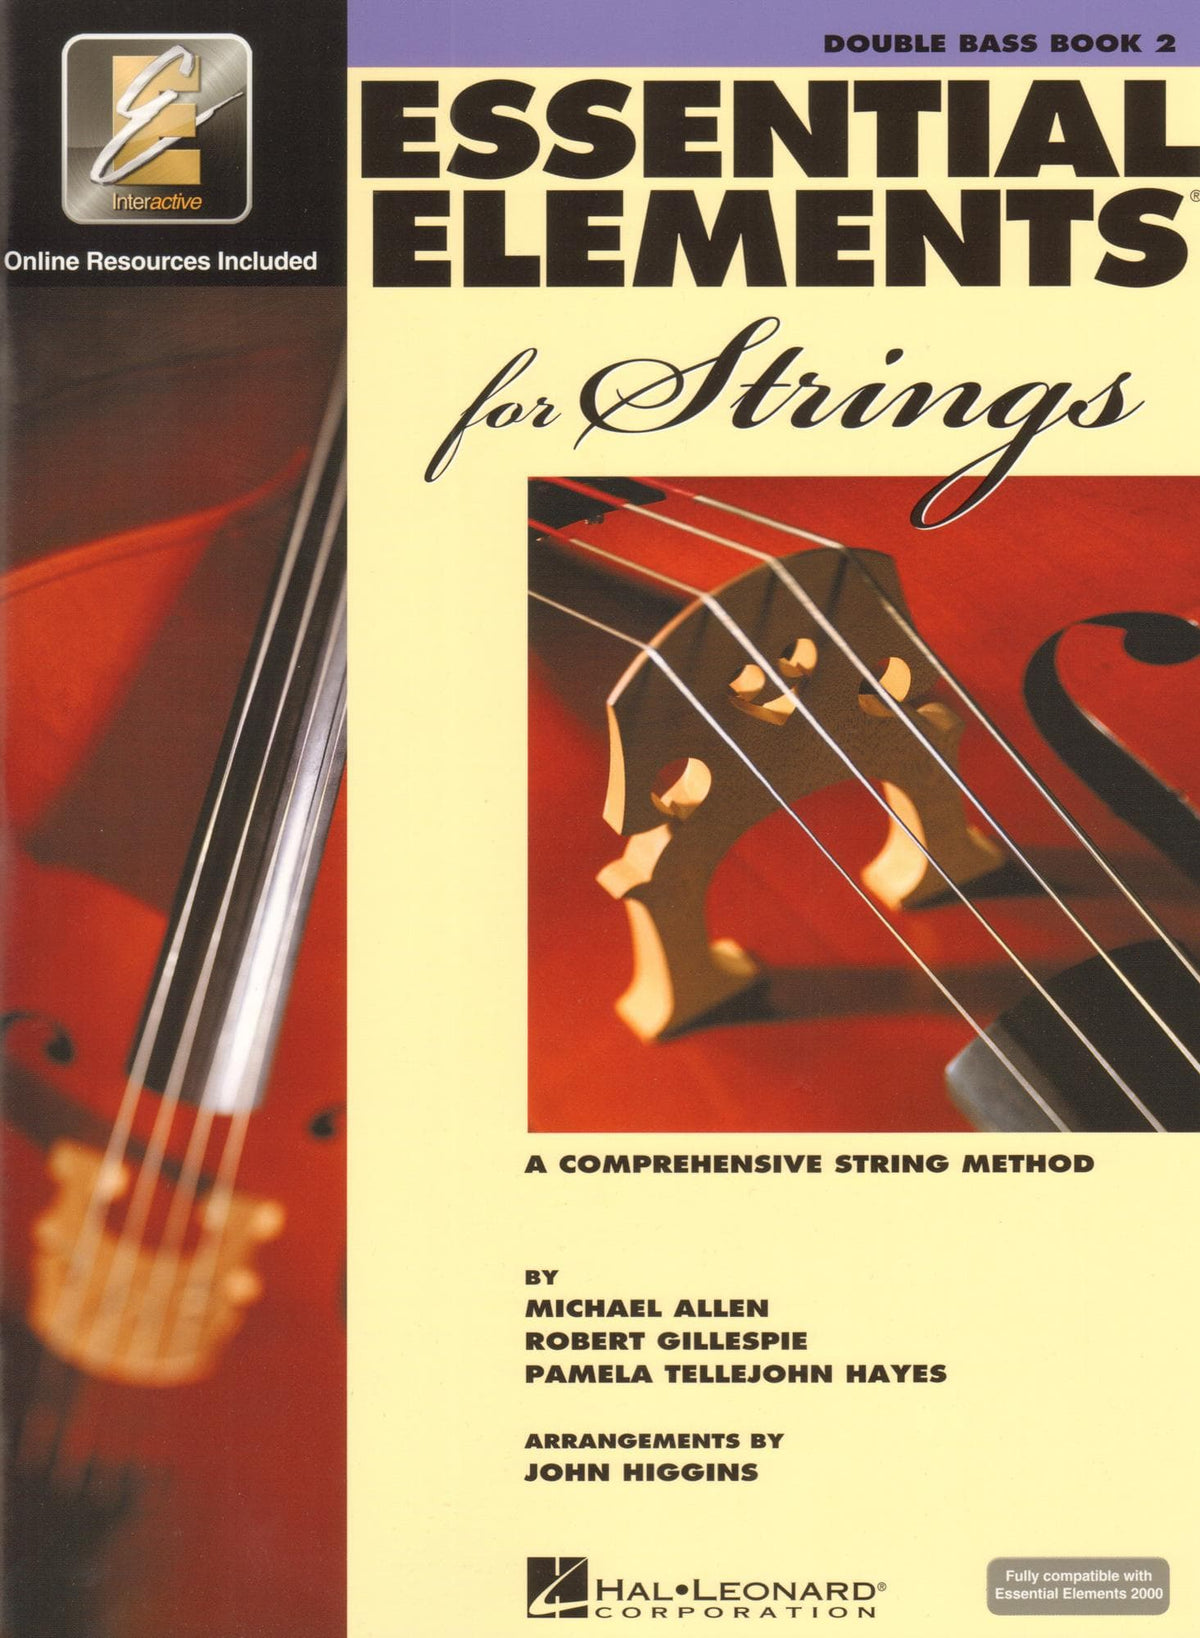 Essential Elements Interactive (formerly 2000) for Strings - Bass Book 2 - by Allen/Gillespie/Hayes - Hal Leonard Publication